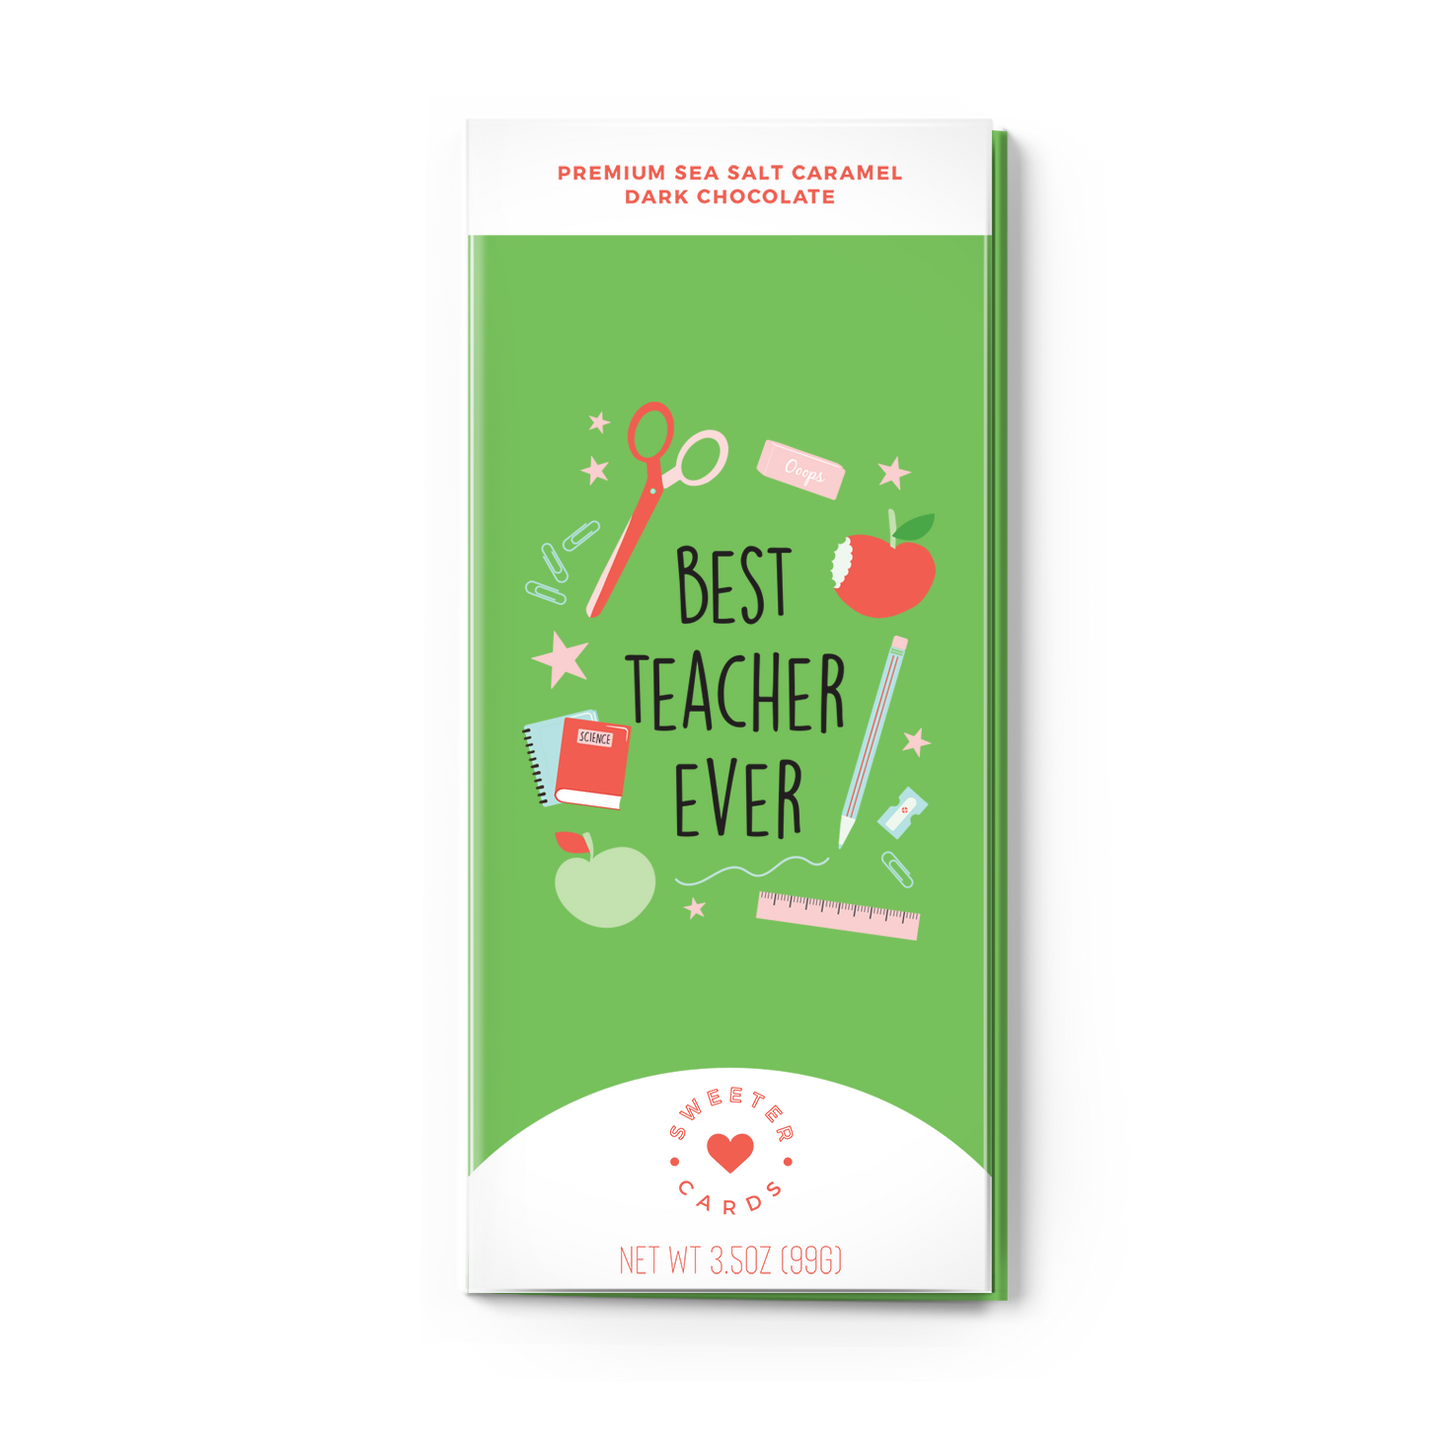 Sweeter Card - Best teacher ever Card with Fair trade Certified Chocolate inside  Sweeter Cards Chocolate Bar + Greeting Card in ONE!   -better made easy-eco-friendly-sustainable-gifting